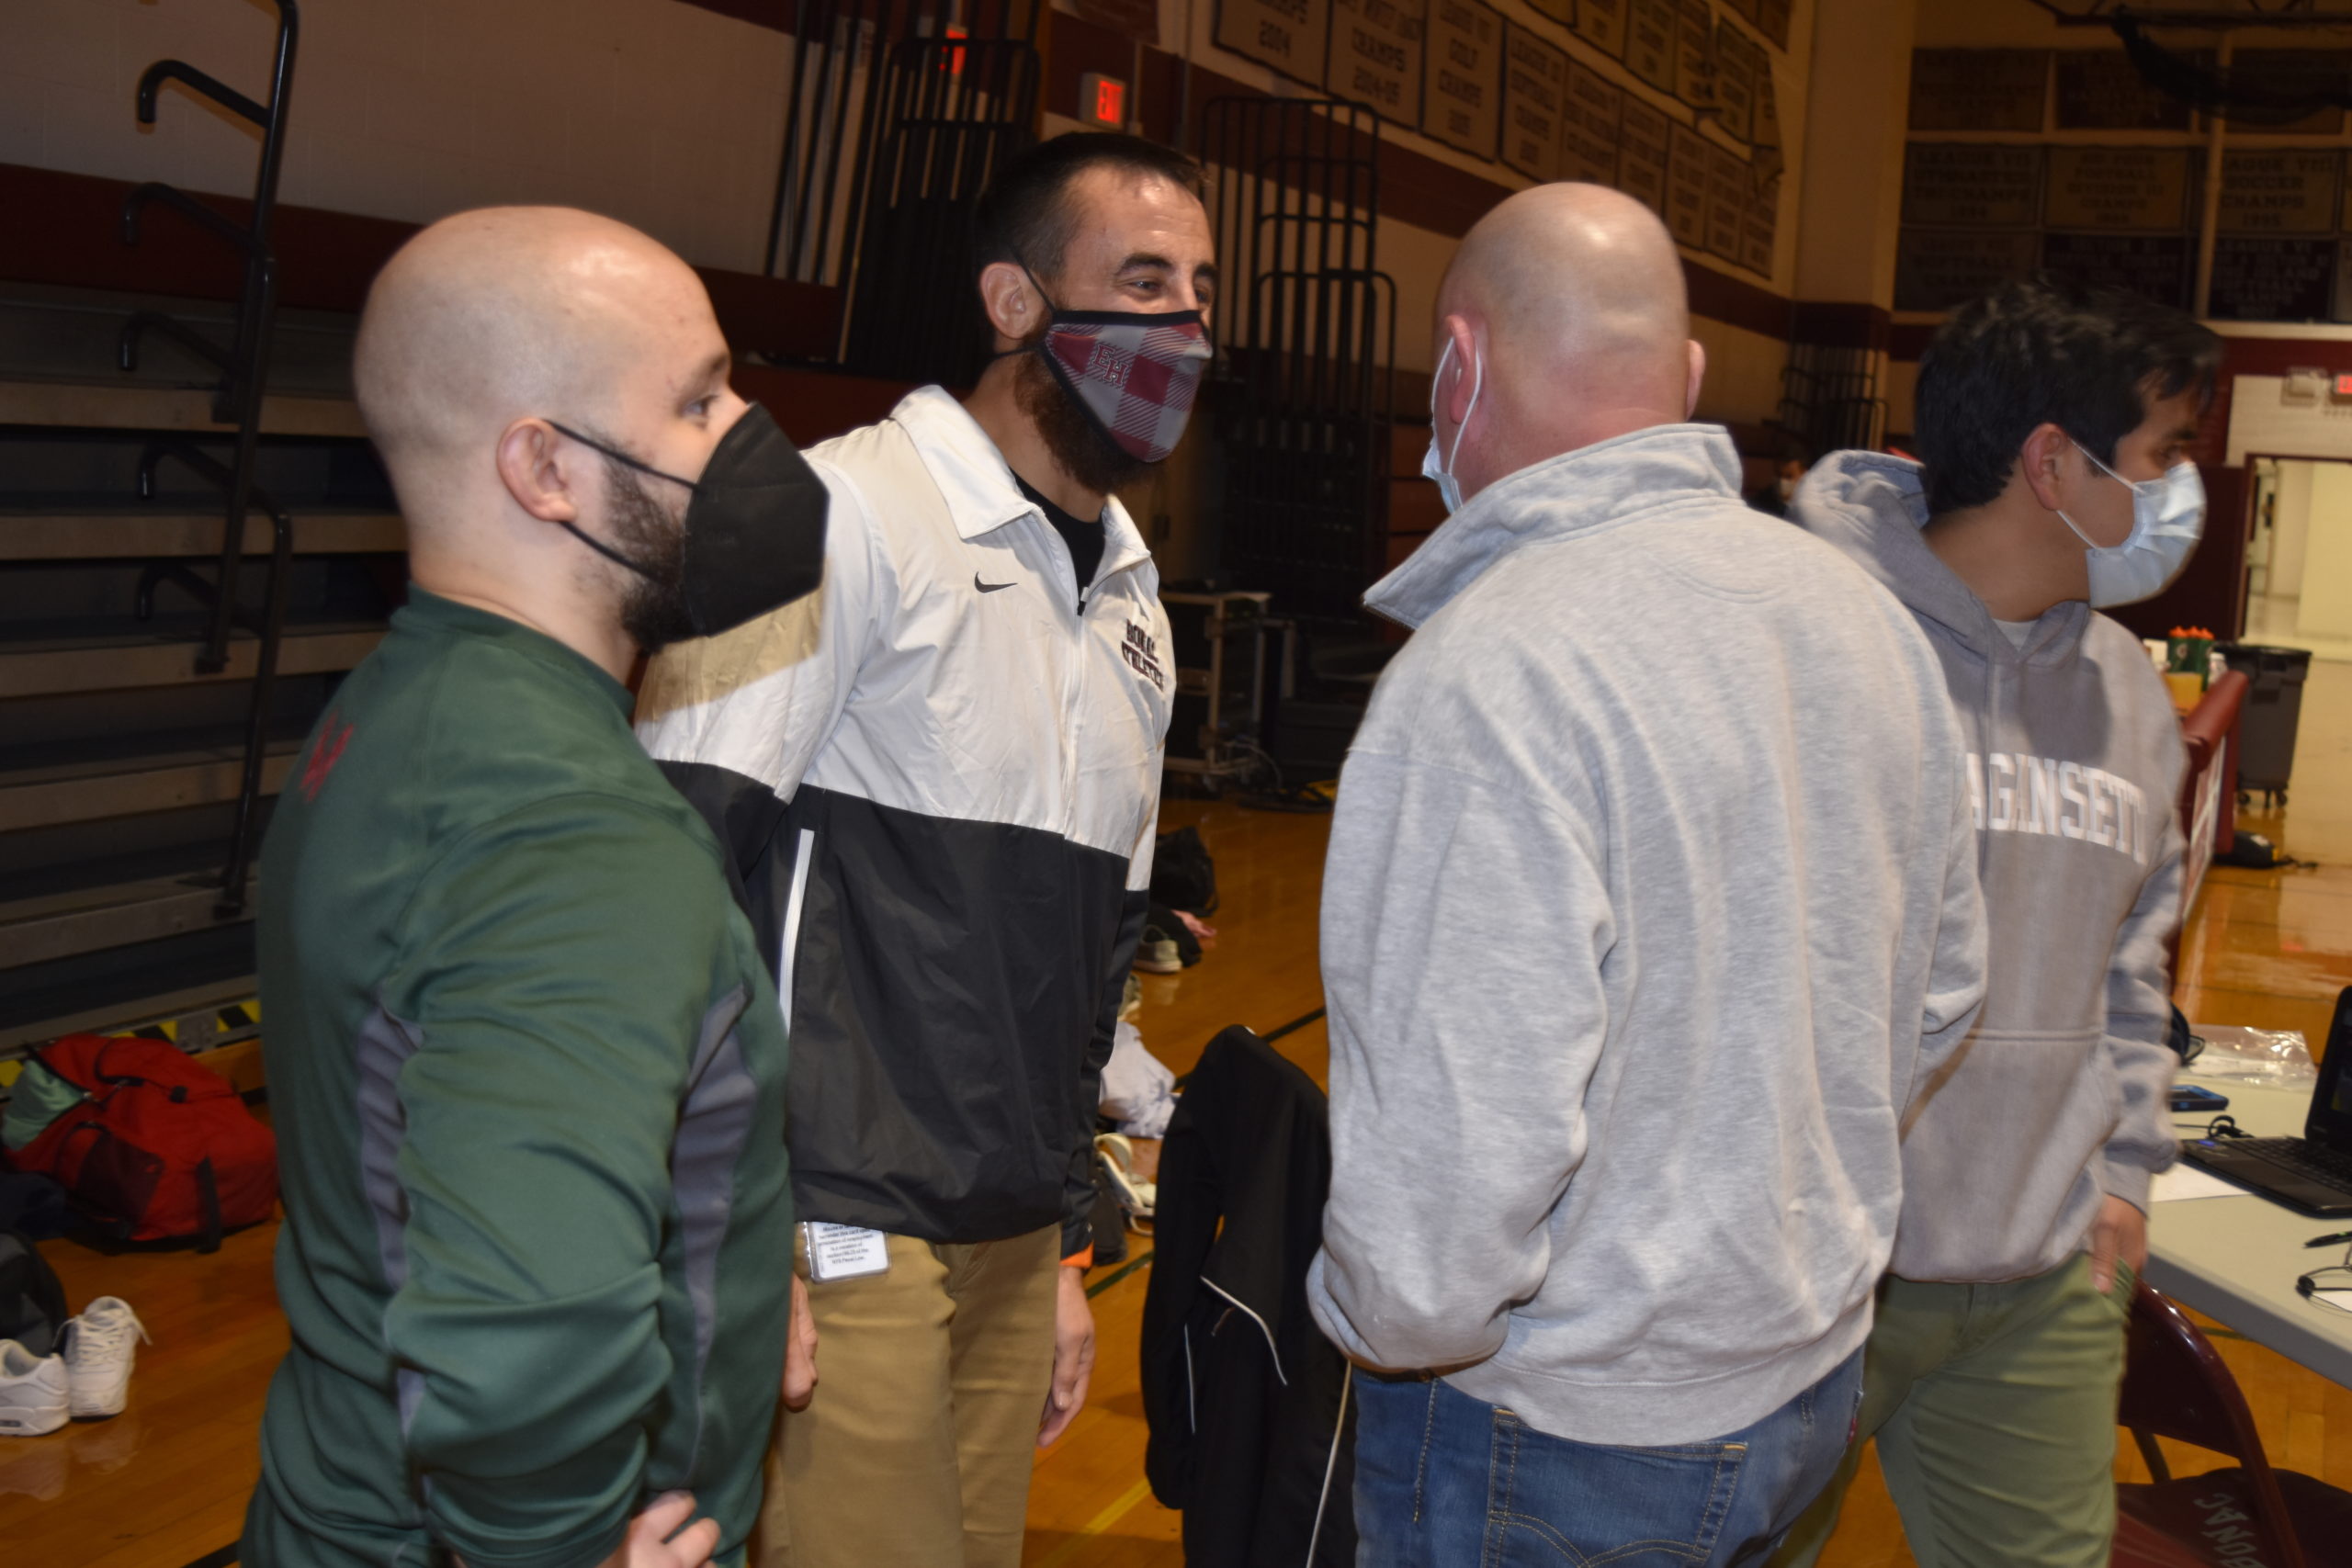 Ethan Mitchell shares a moment with former coach Paul Bass just prior to Friday's match.